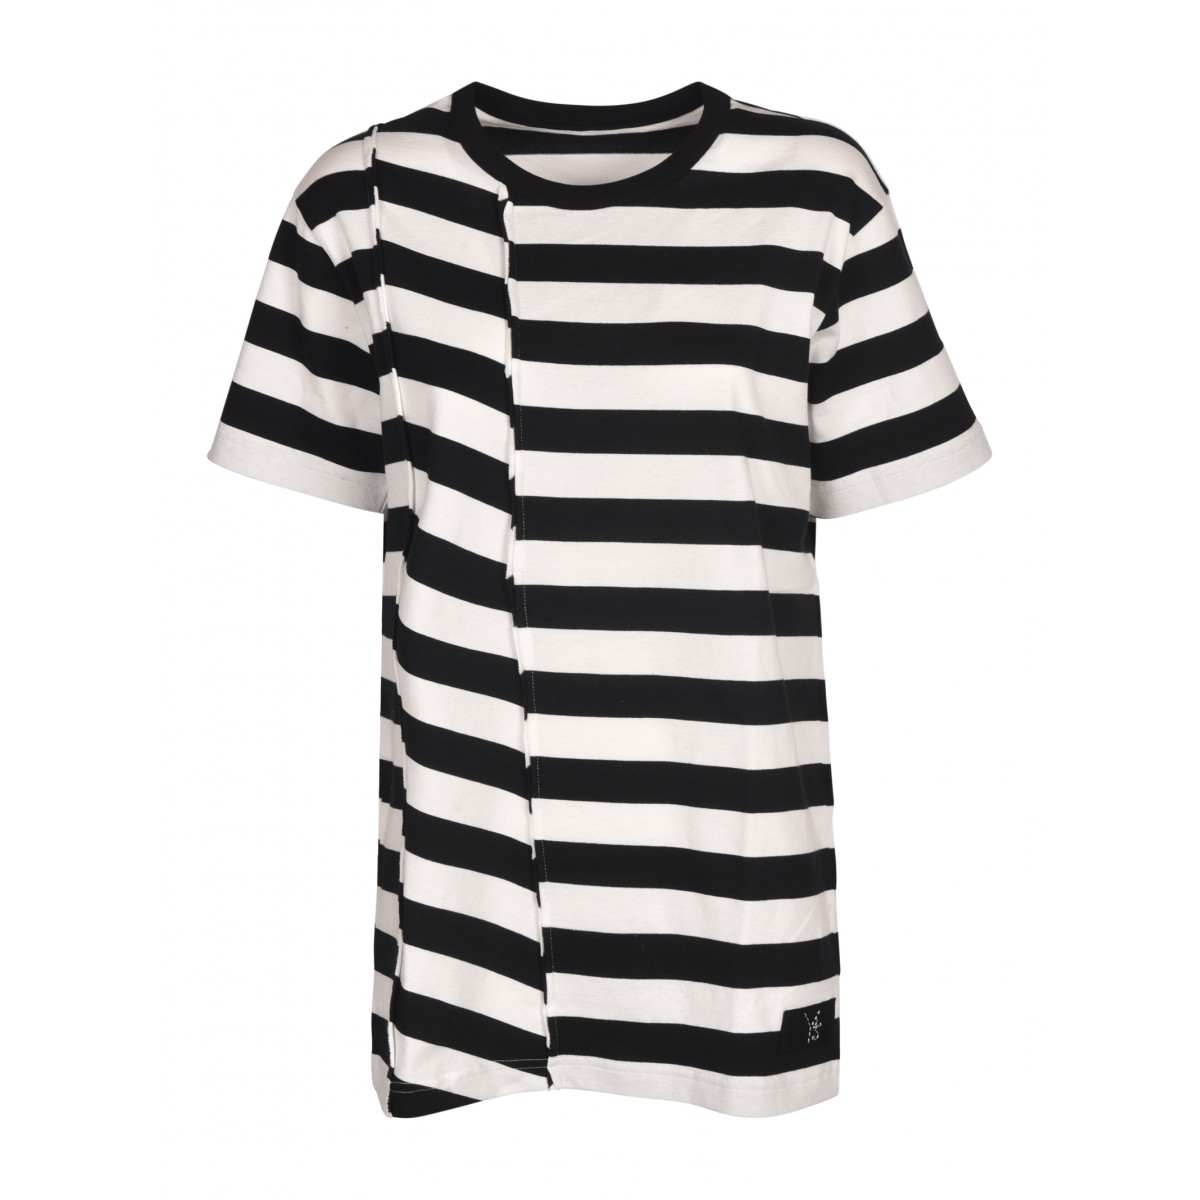 Black and White Striped Cotton T-Shirt